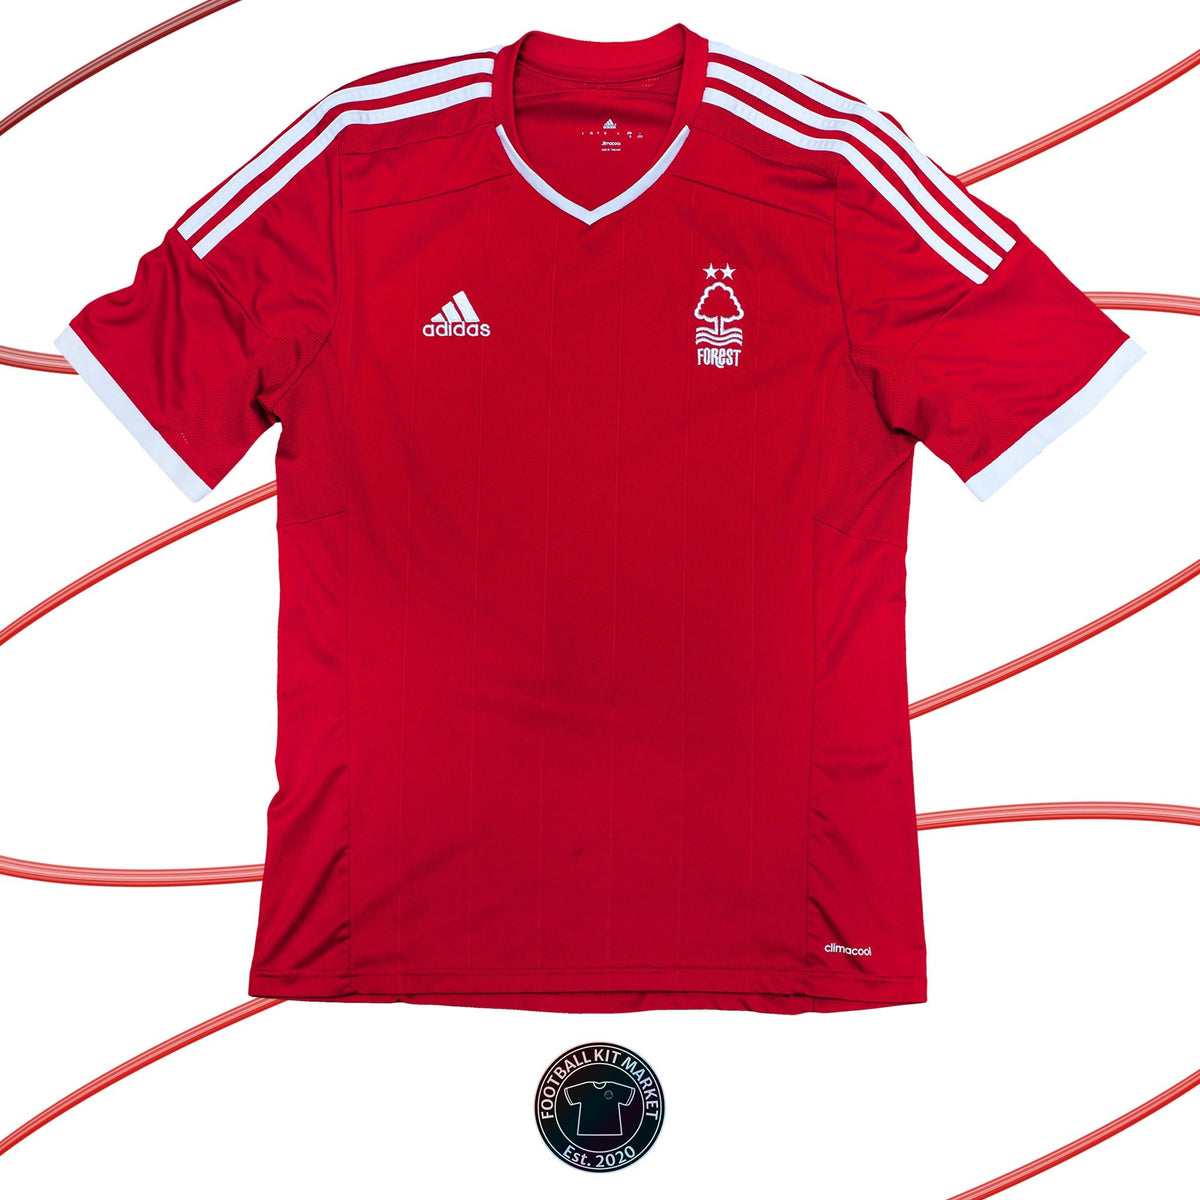 Genuine NOTTINGHAM FOREST Home Shirt (2014-2015) - ADIDAS (S) - Product Image from Football Kit Market